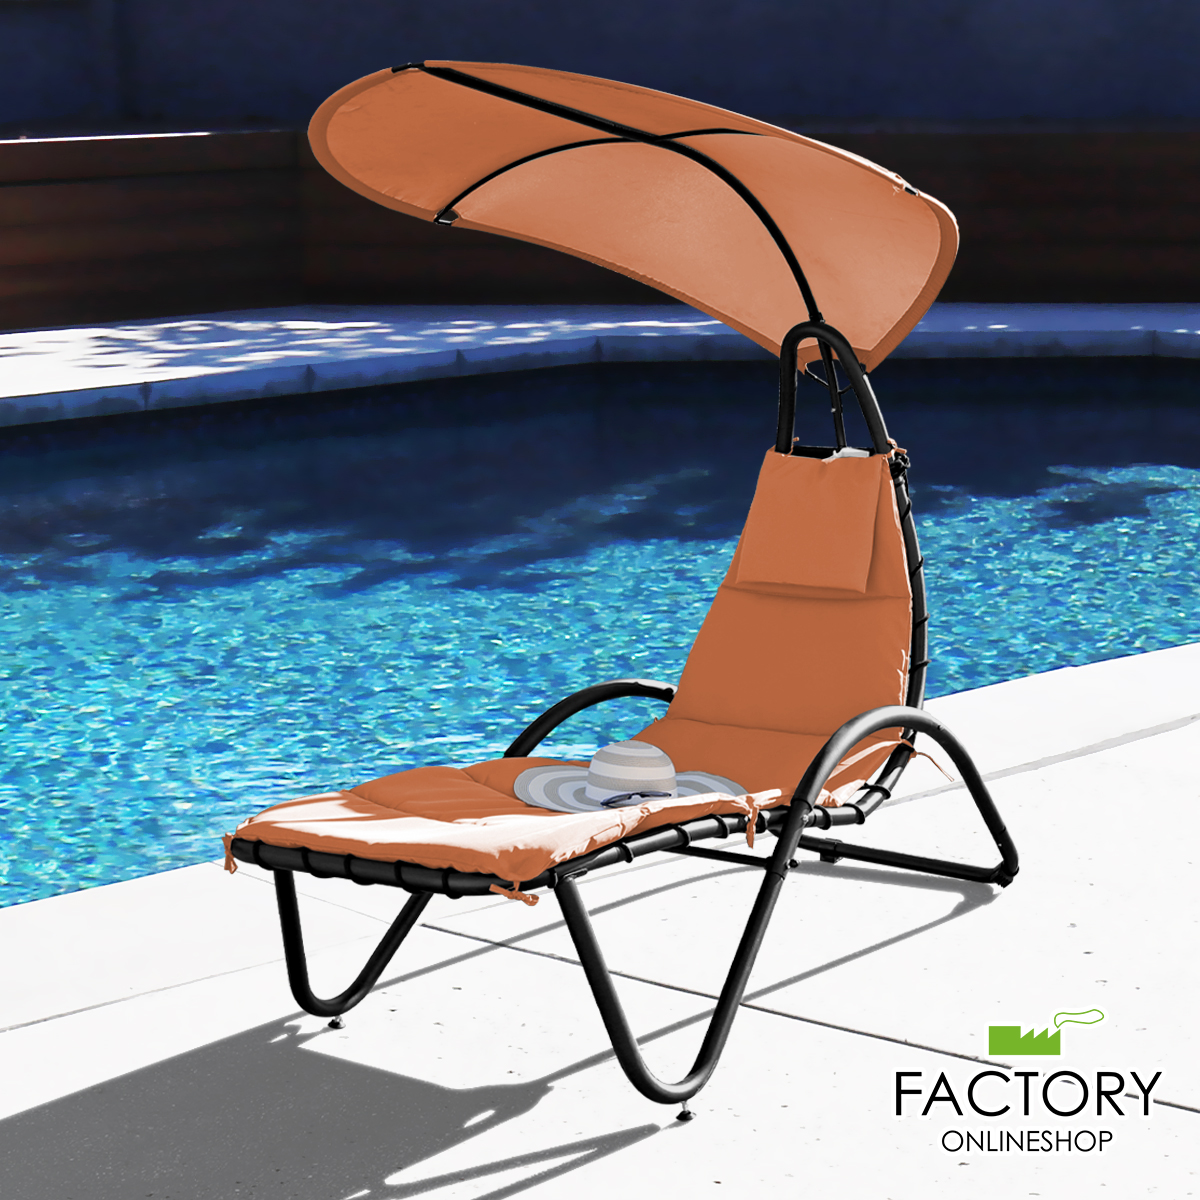 Hanging Chaise Lounger Chair Patio Porch Arc Swing Hammock Chair Canopy Outdoor [Orange] - image 1 of 8